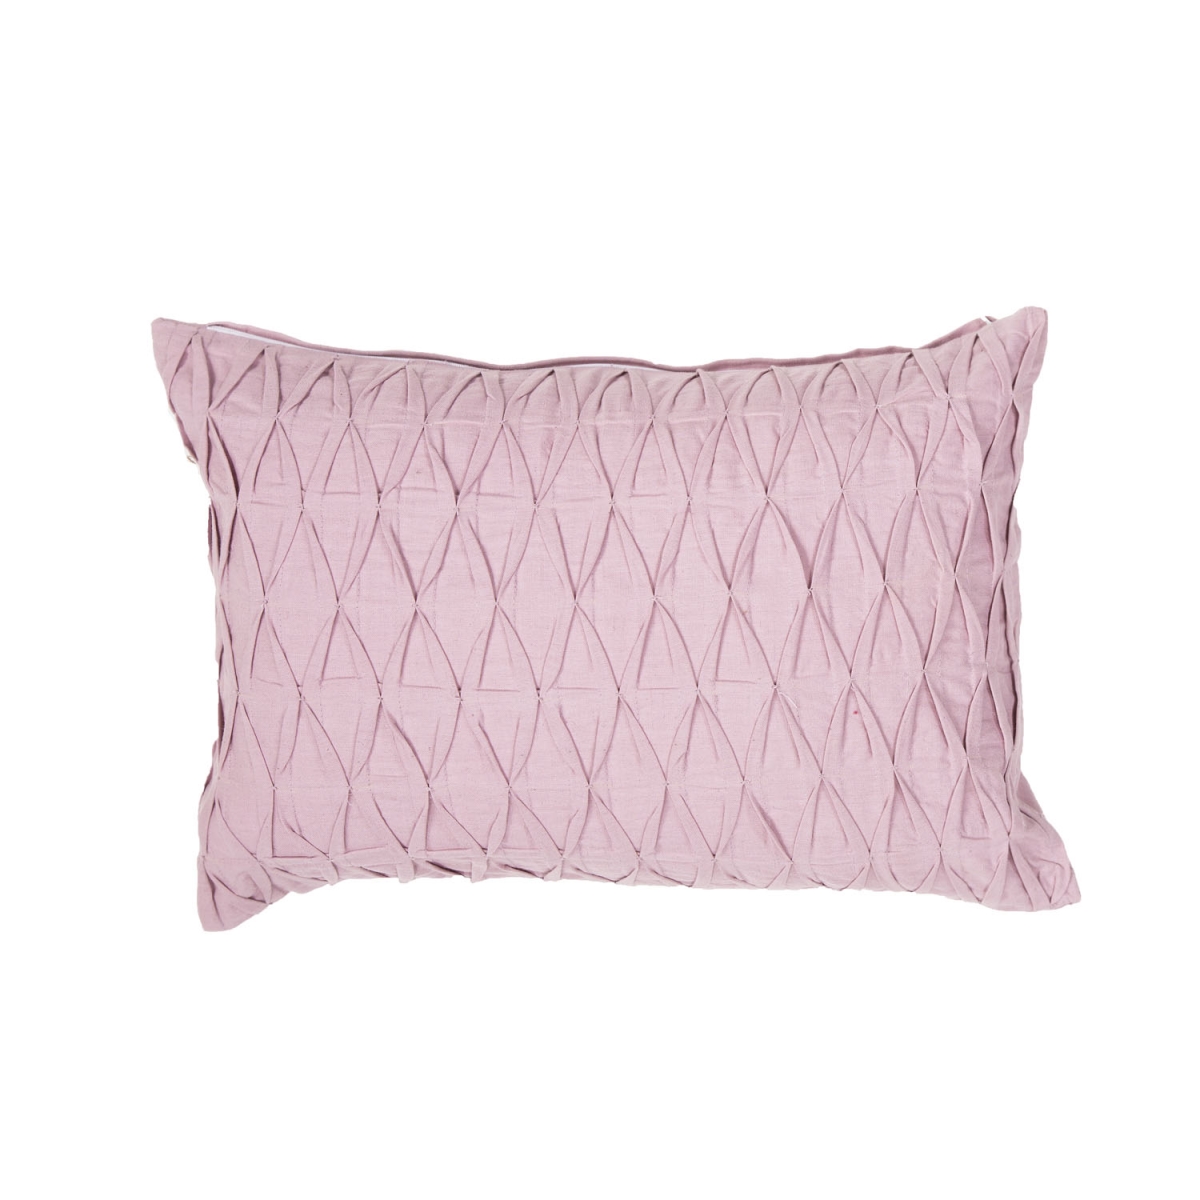 Plw102323 14 X 20 In. Petal Sonali Pink Solid Down Throw Pillow